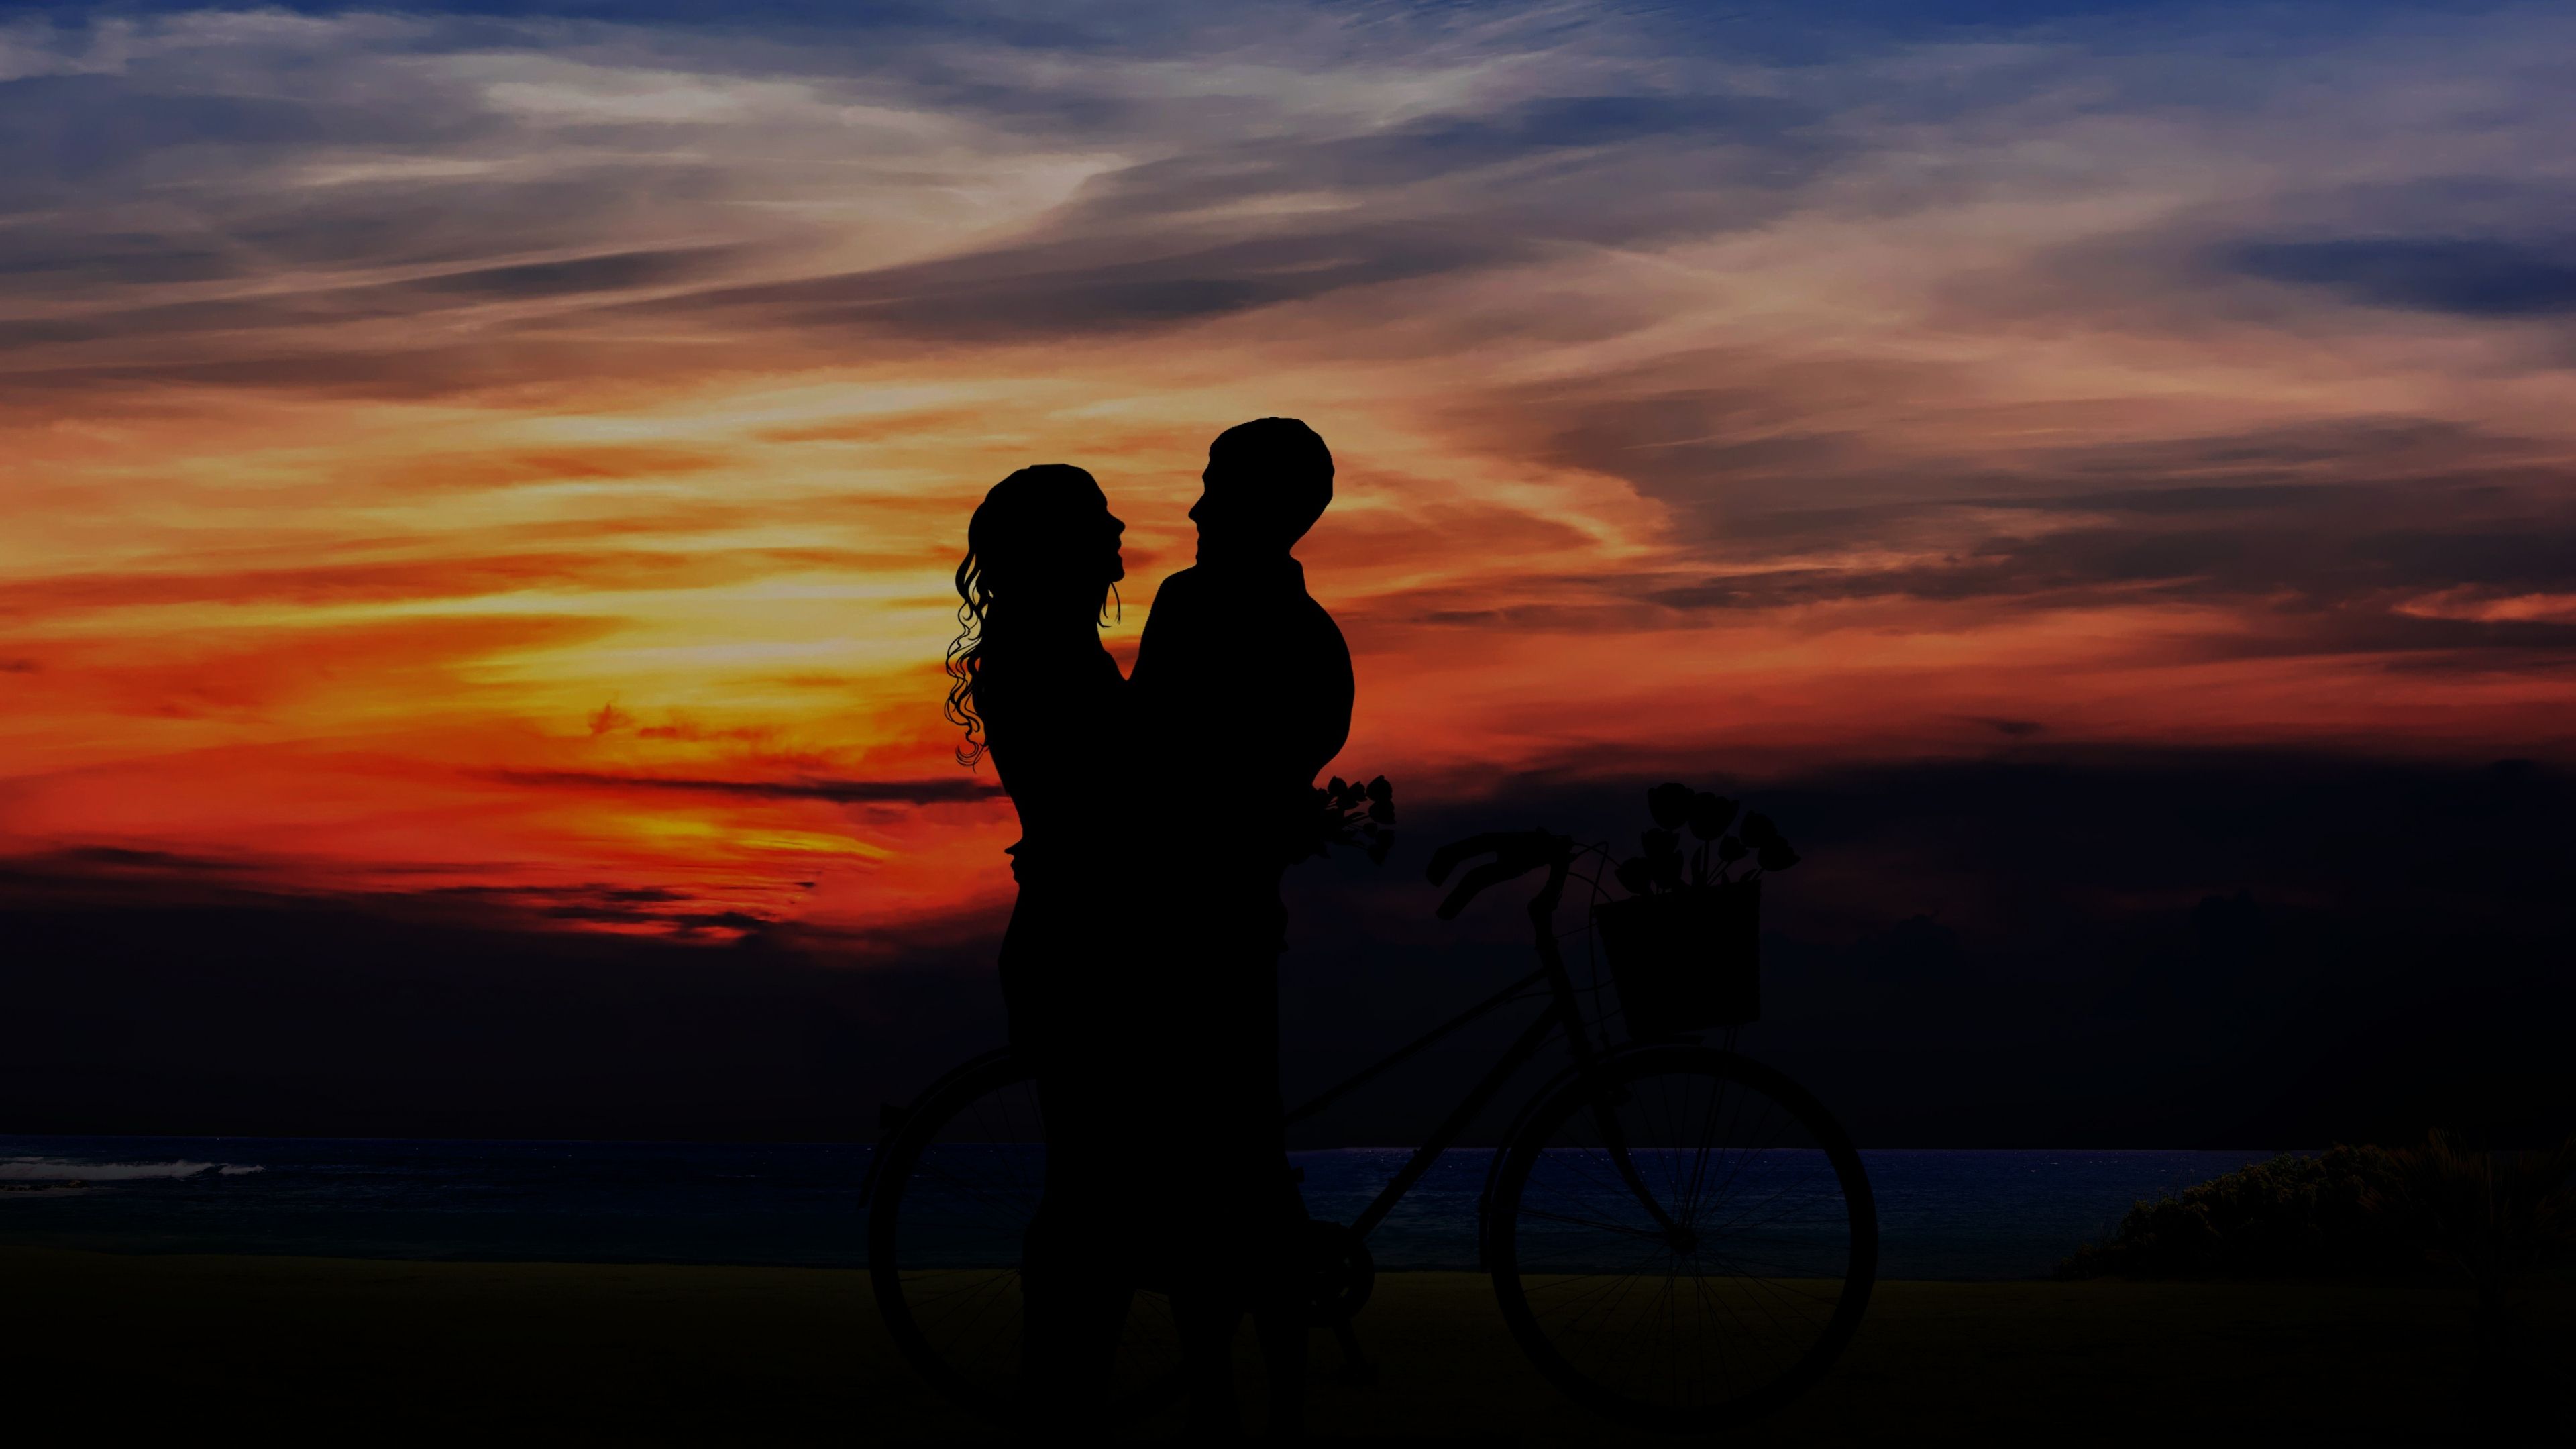 Download 3840x2160 wallpaper couple, love, sunset, outdoor, 4k, uhd 16: widescreen, 3840x2160 HD image, background, 3251